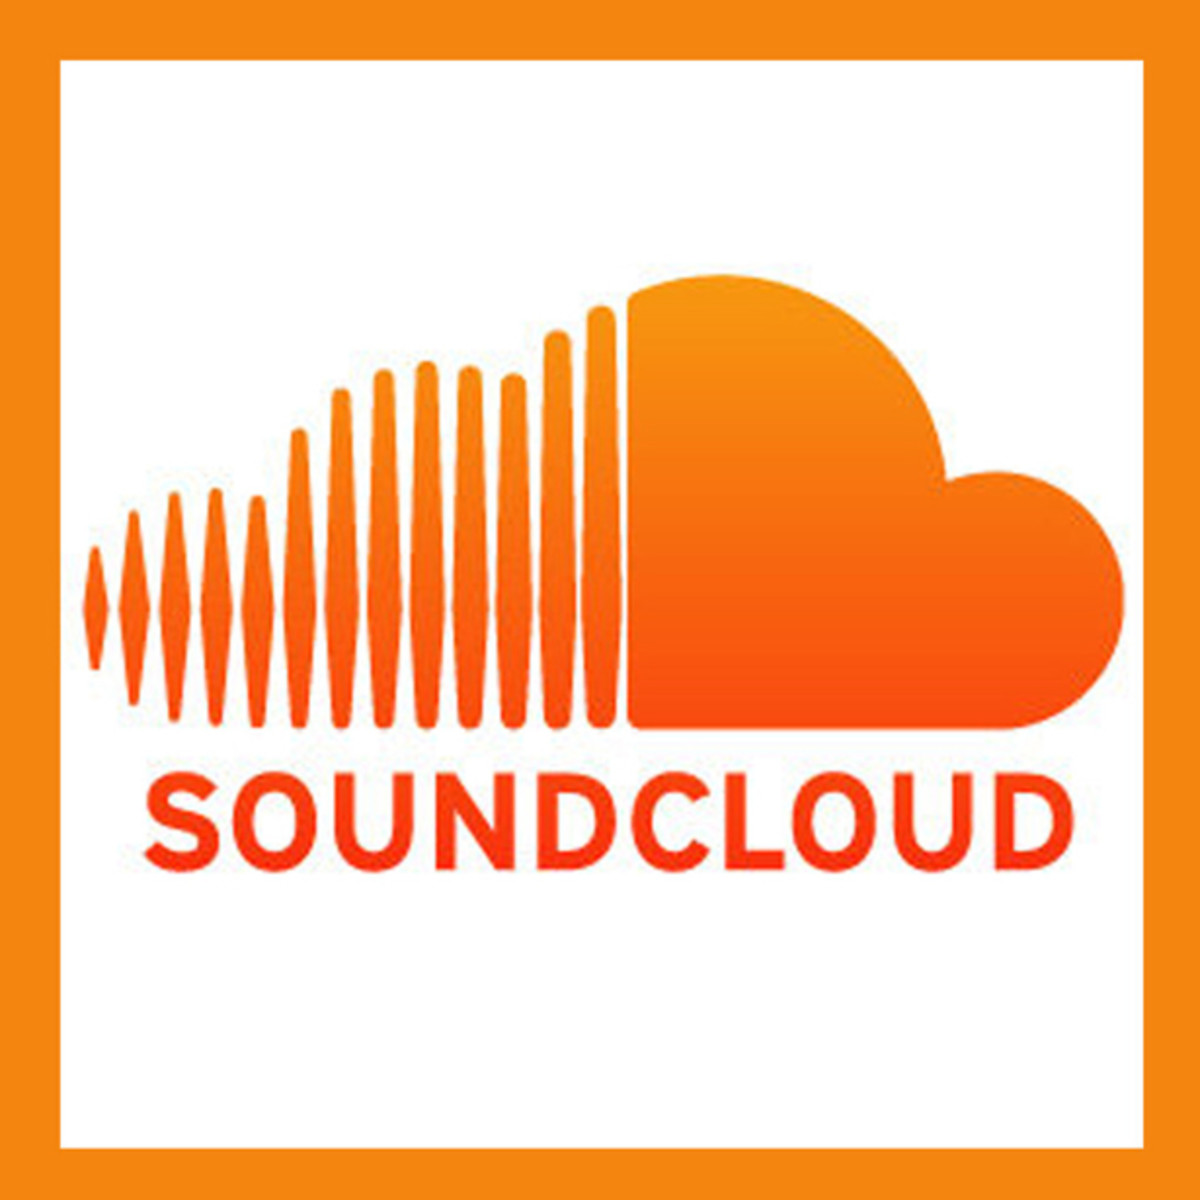 EDM Culture: Why SoundCloud Is Way Better Than Terrestrial Radio